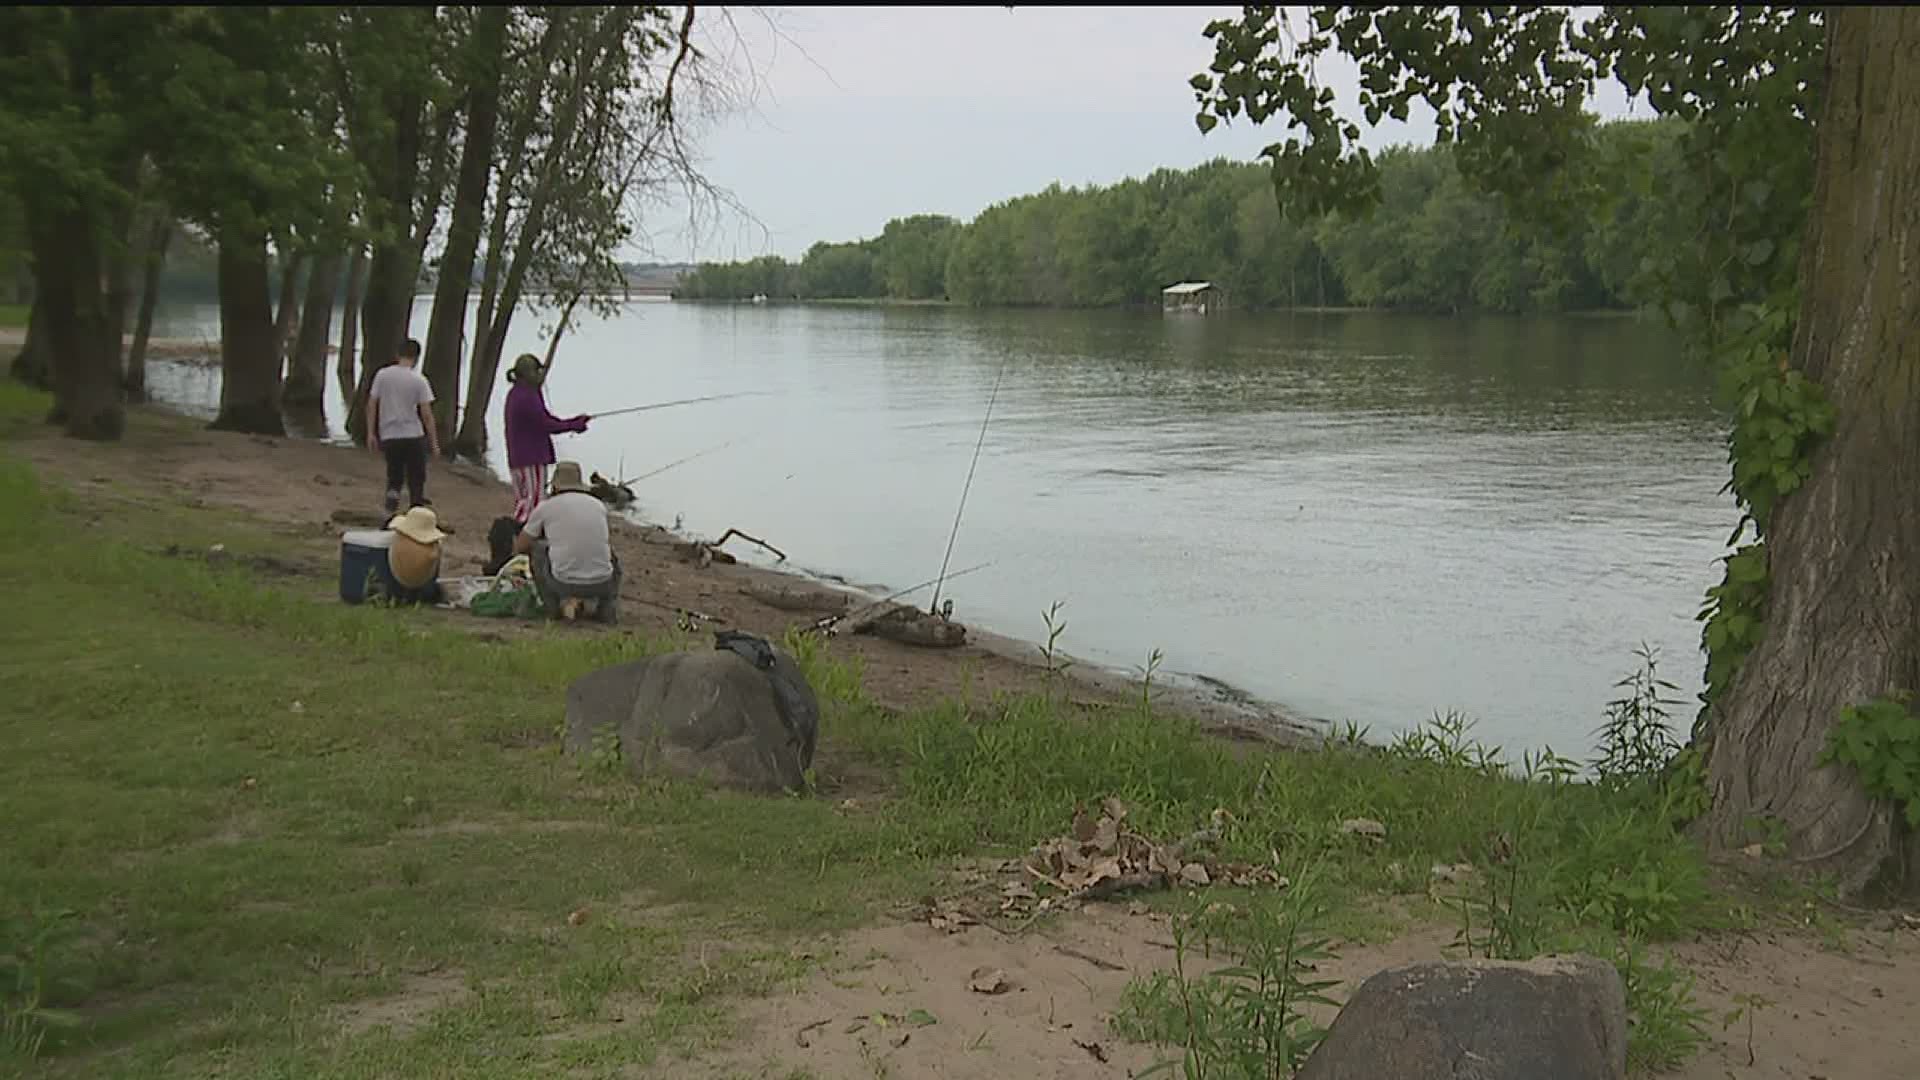 Free fishing in Illinois for the entire weekend